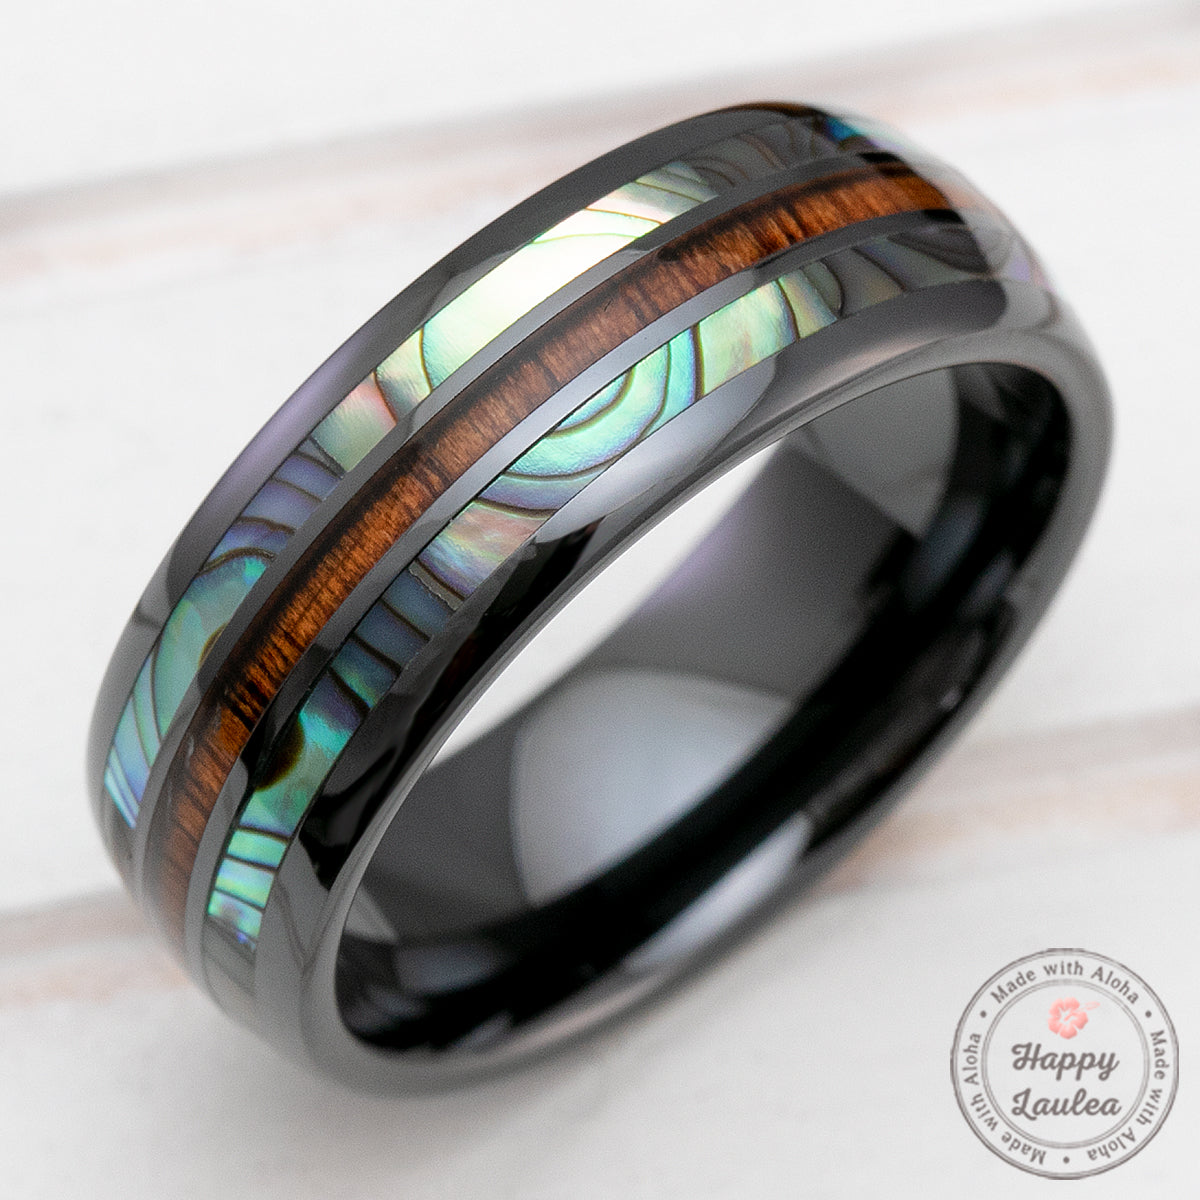 HI-TECH Black Ceramic Rings with Abalone Shell & Koa Wood Tri-Inlay (Shell-Wood-Shell) - 8mm, Dome Shape, Comfort Fitment